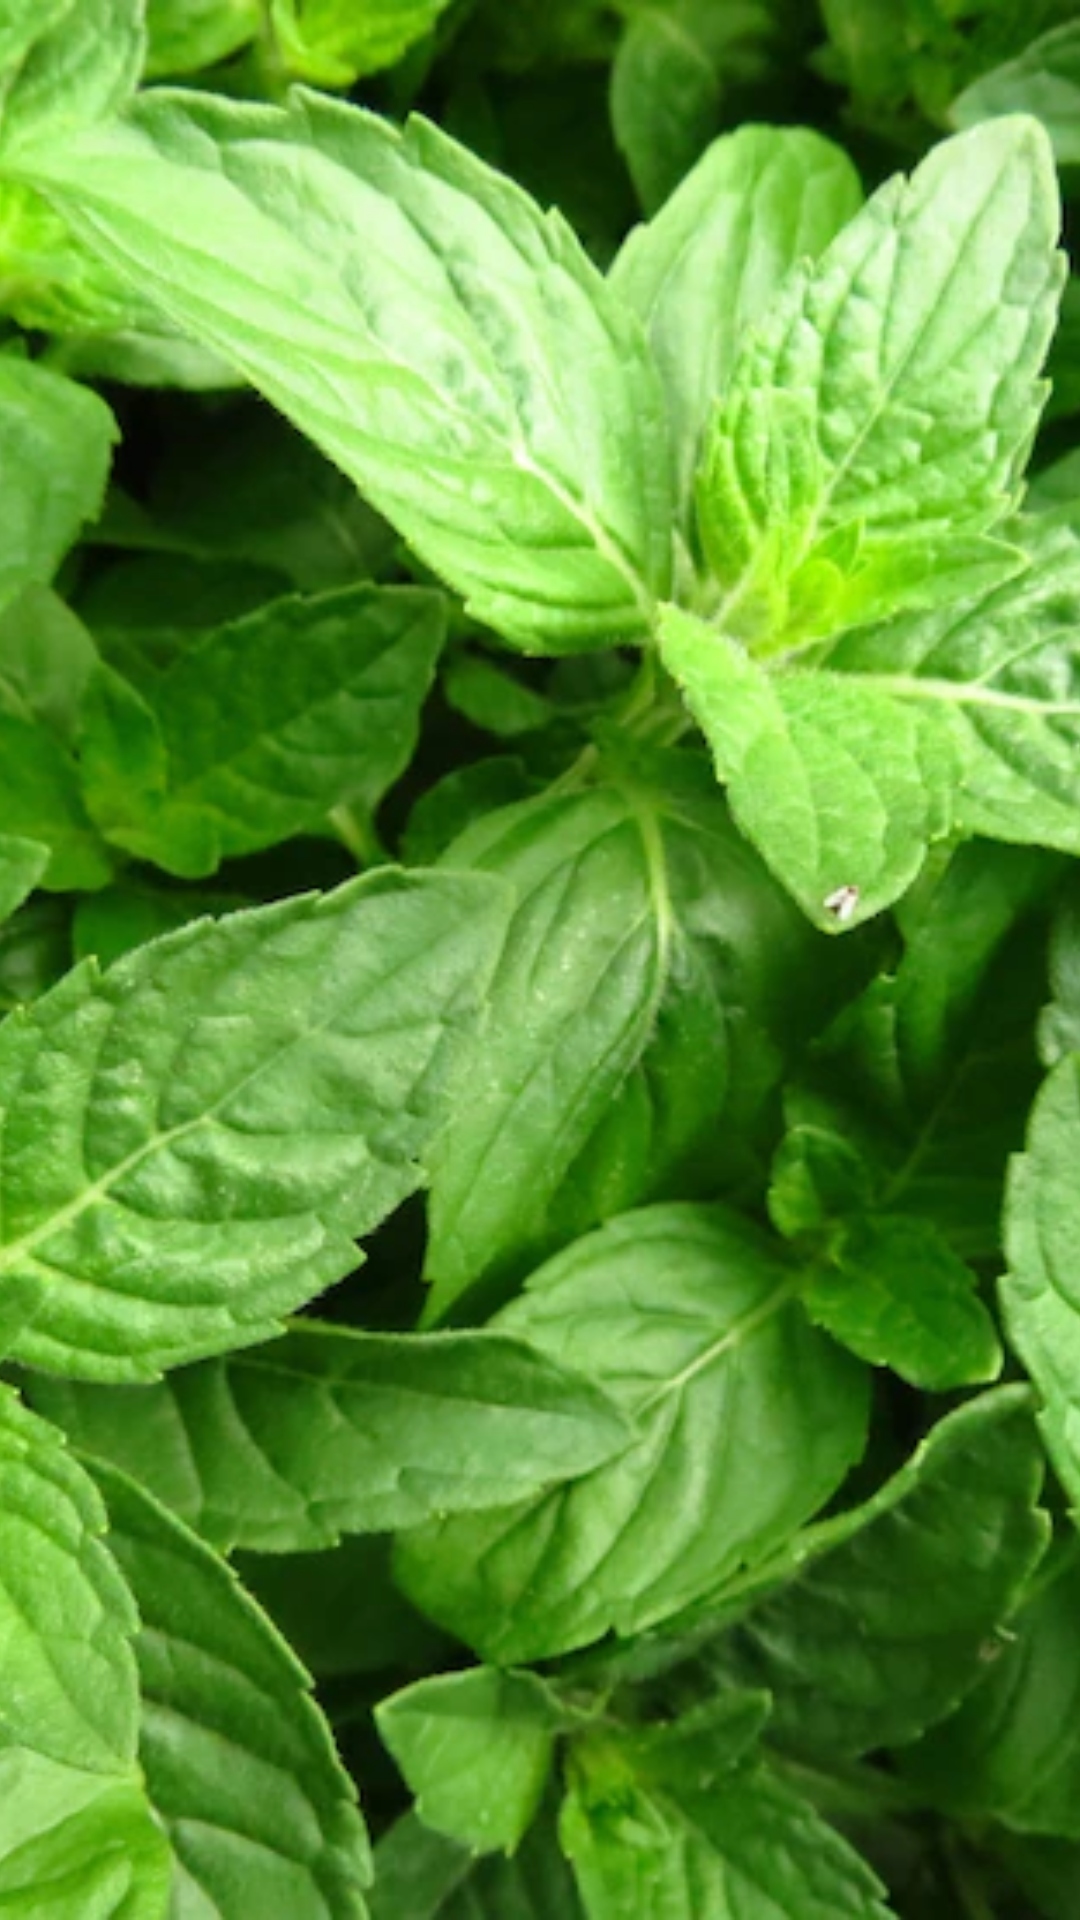  Basil leaves prevent complications of diabetes; know its health benefits